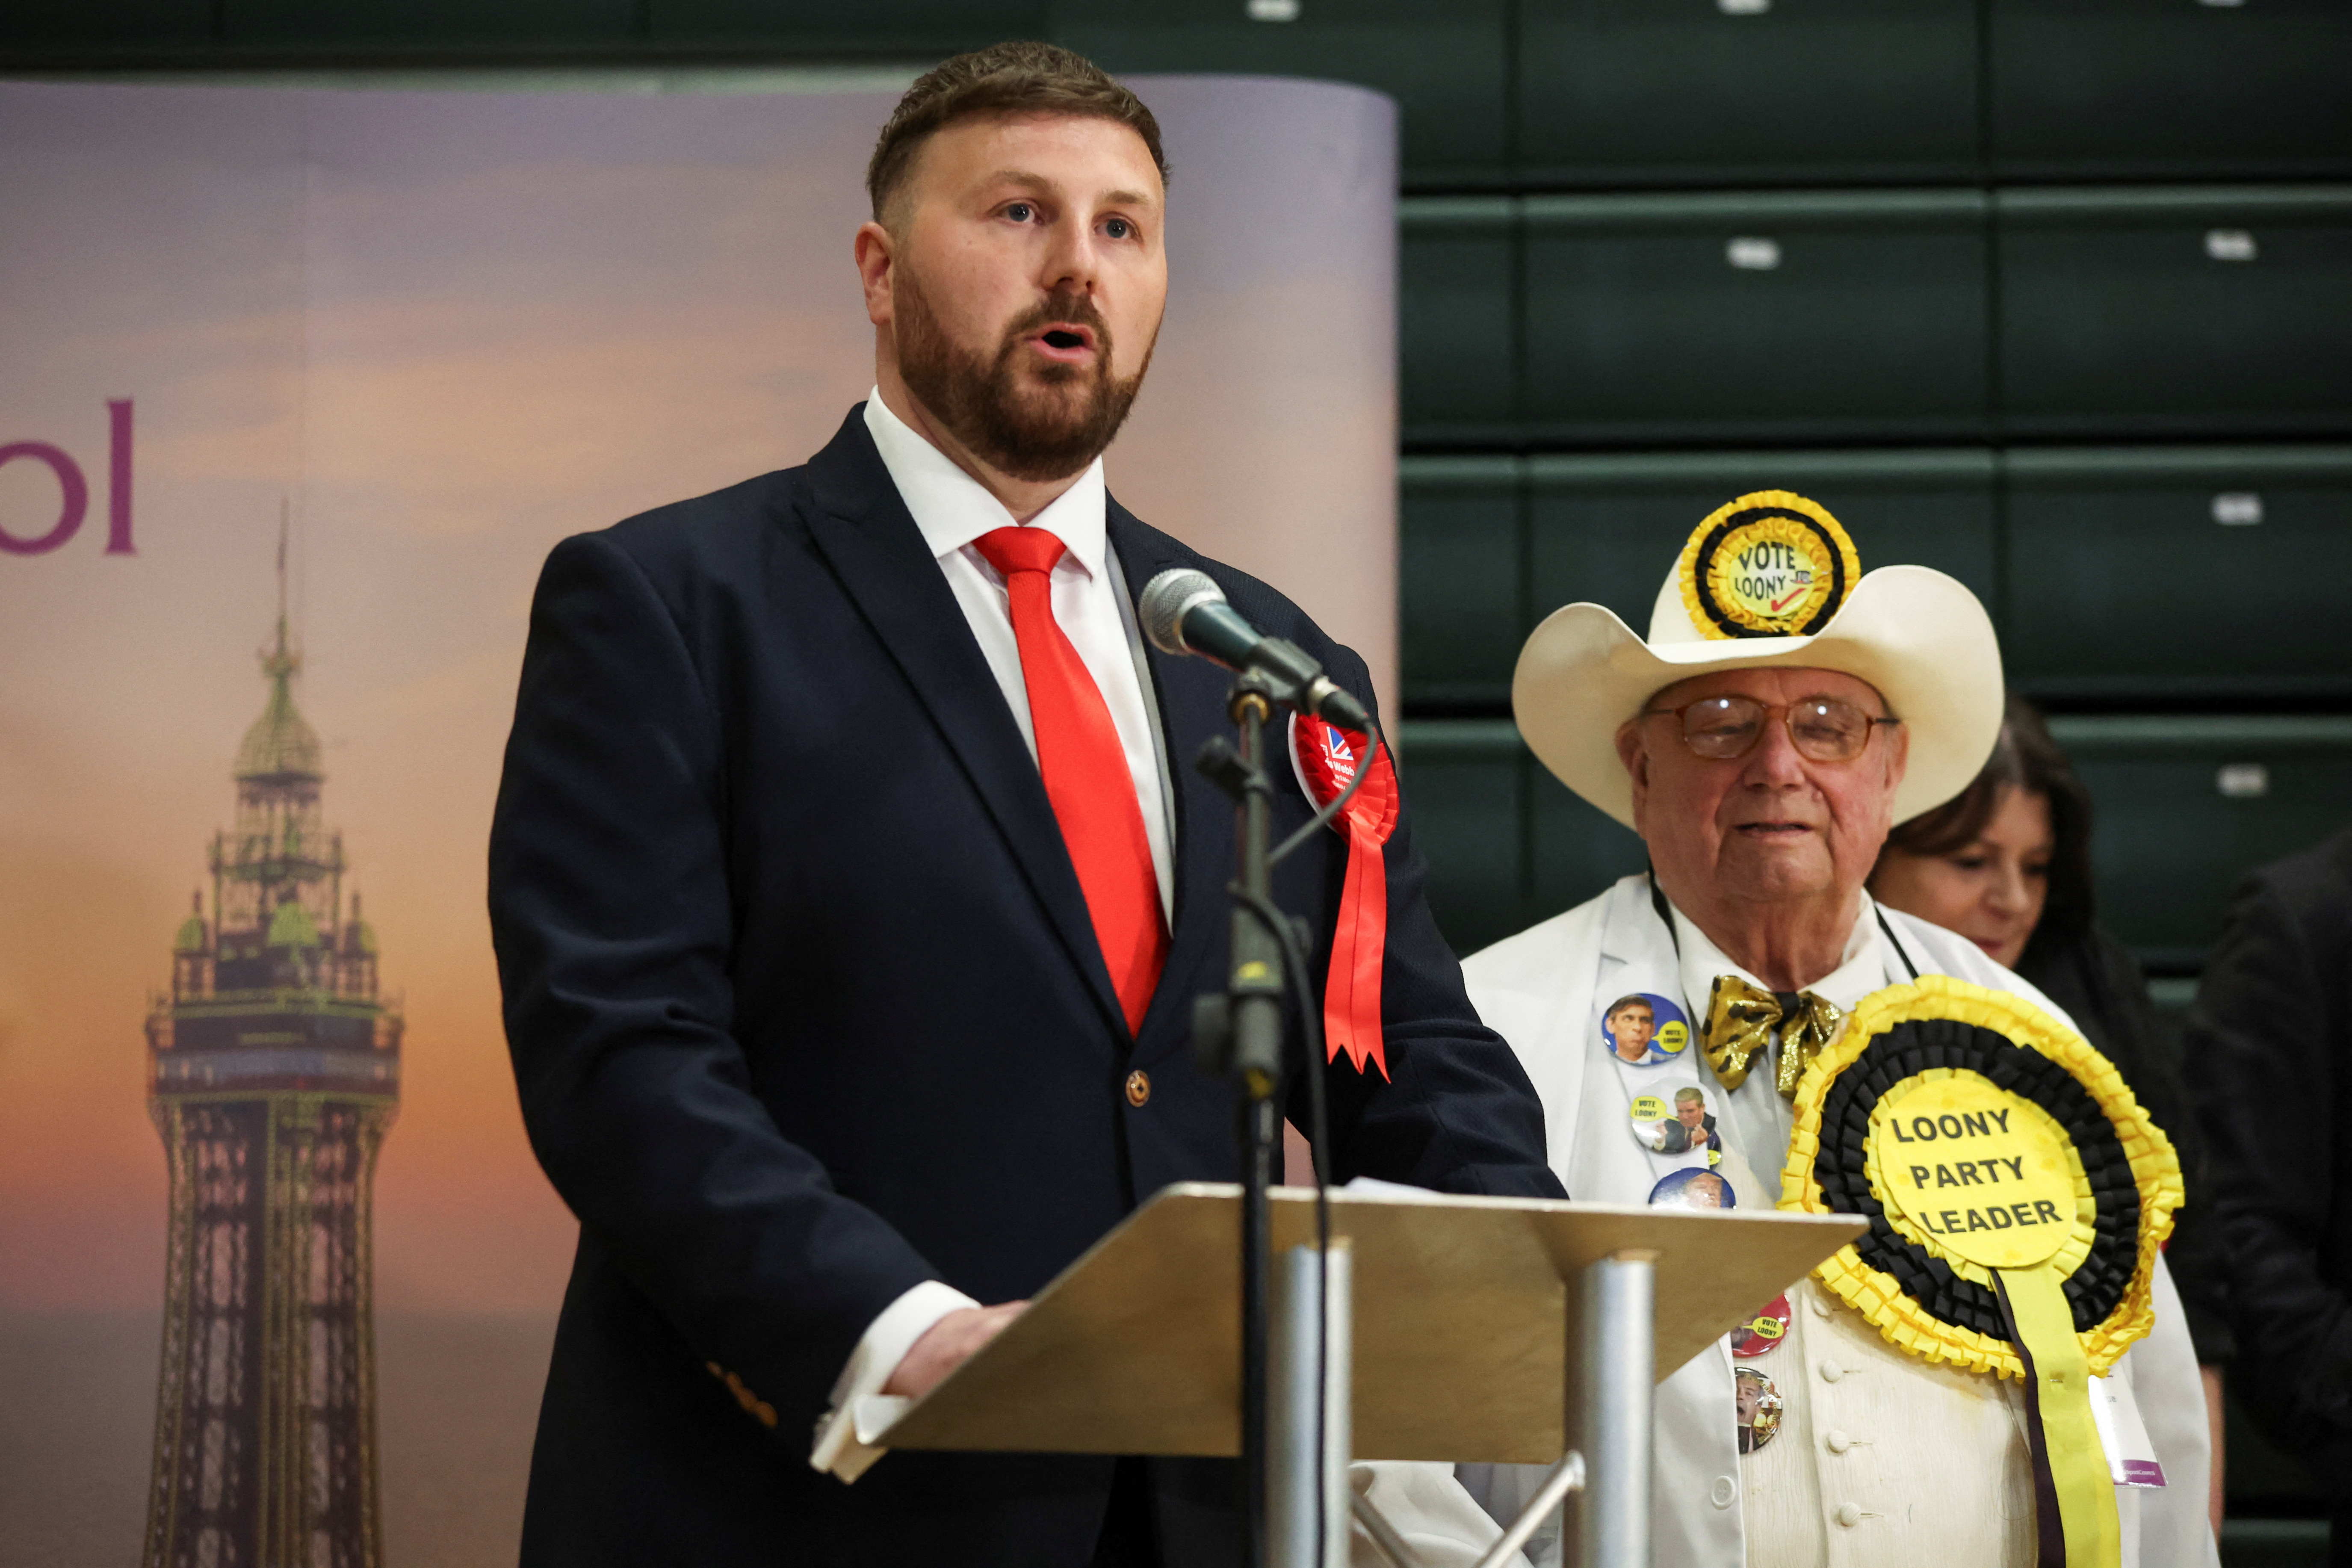 Blackpool South Parliamentary by-election